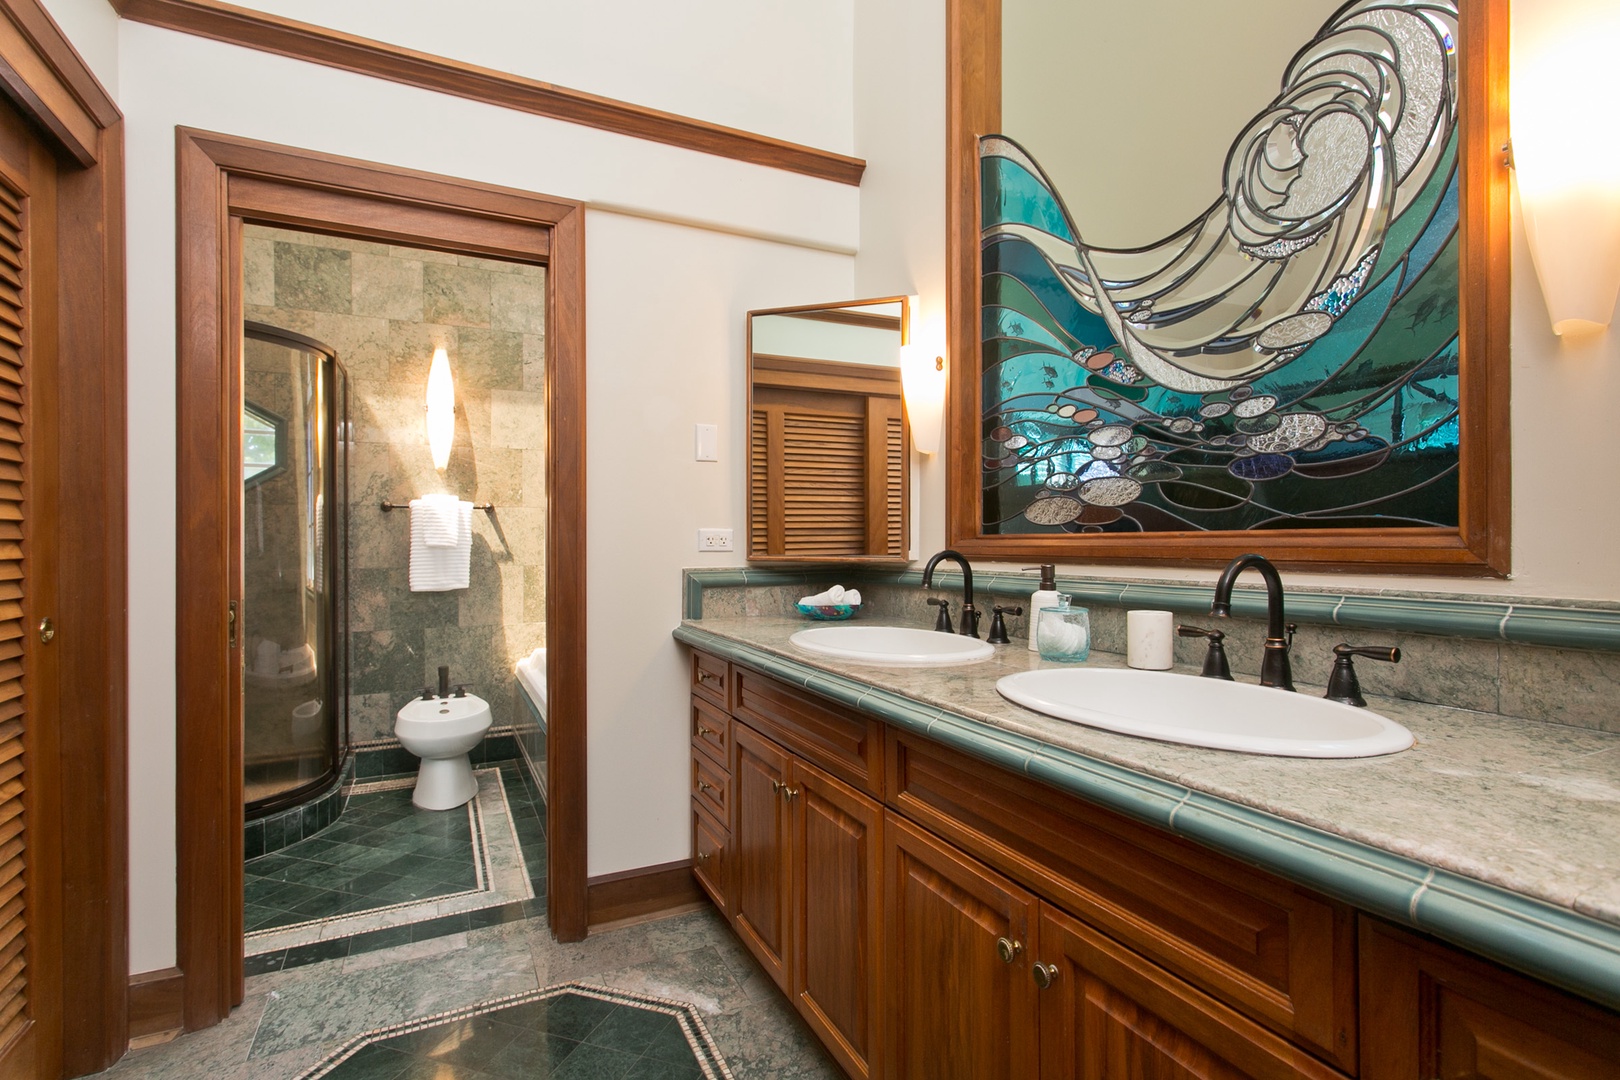 Kailua Vacation Rentals, Hale Melia* - Ensuite bathroom with a walk-in shower